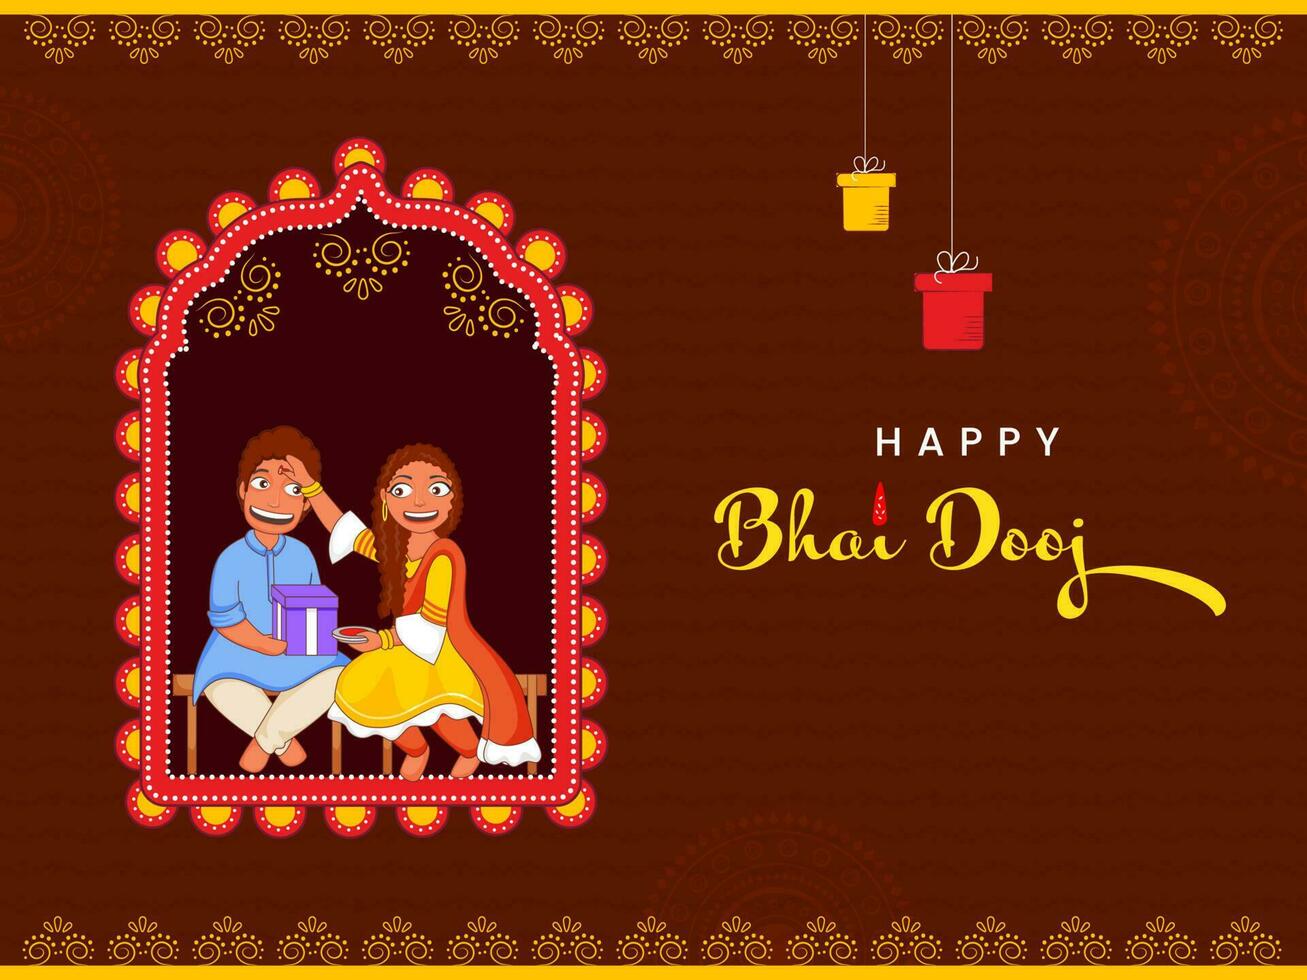 Cheerful Sister Applying Tilak Or Mark To Forehead Of Her Brother On Brown Background For Happy Bhai Dooj Festival. vector